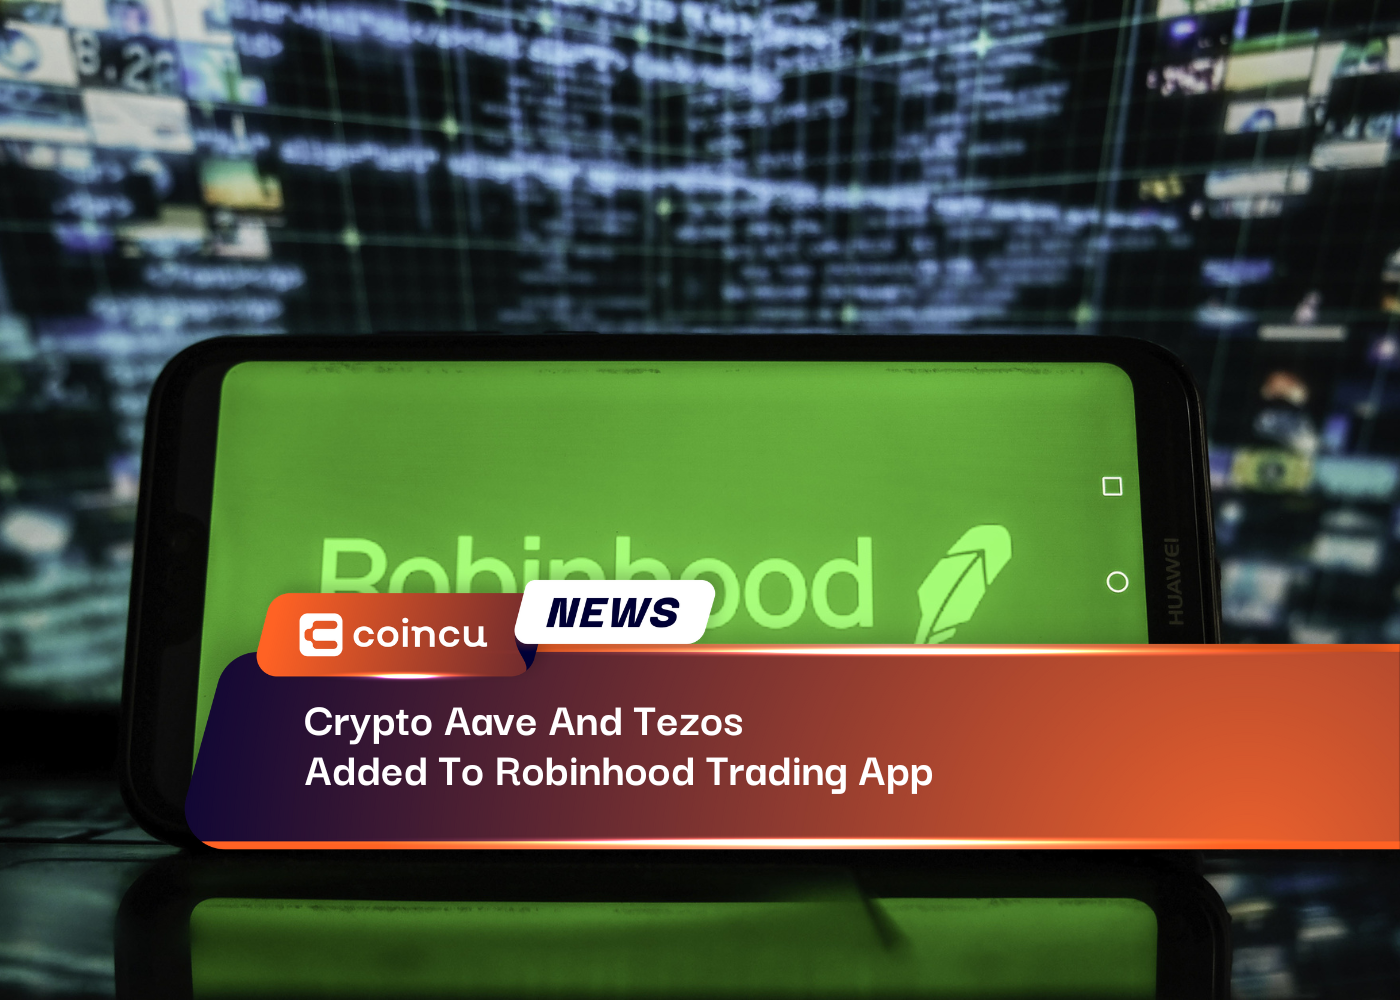 Crypto Aave And Tezos Added To Robinhood Trading App